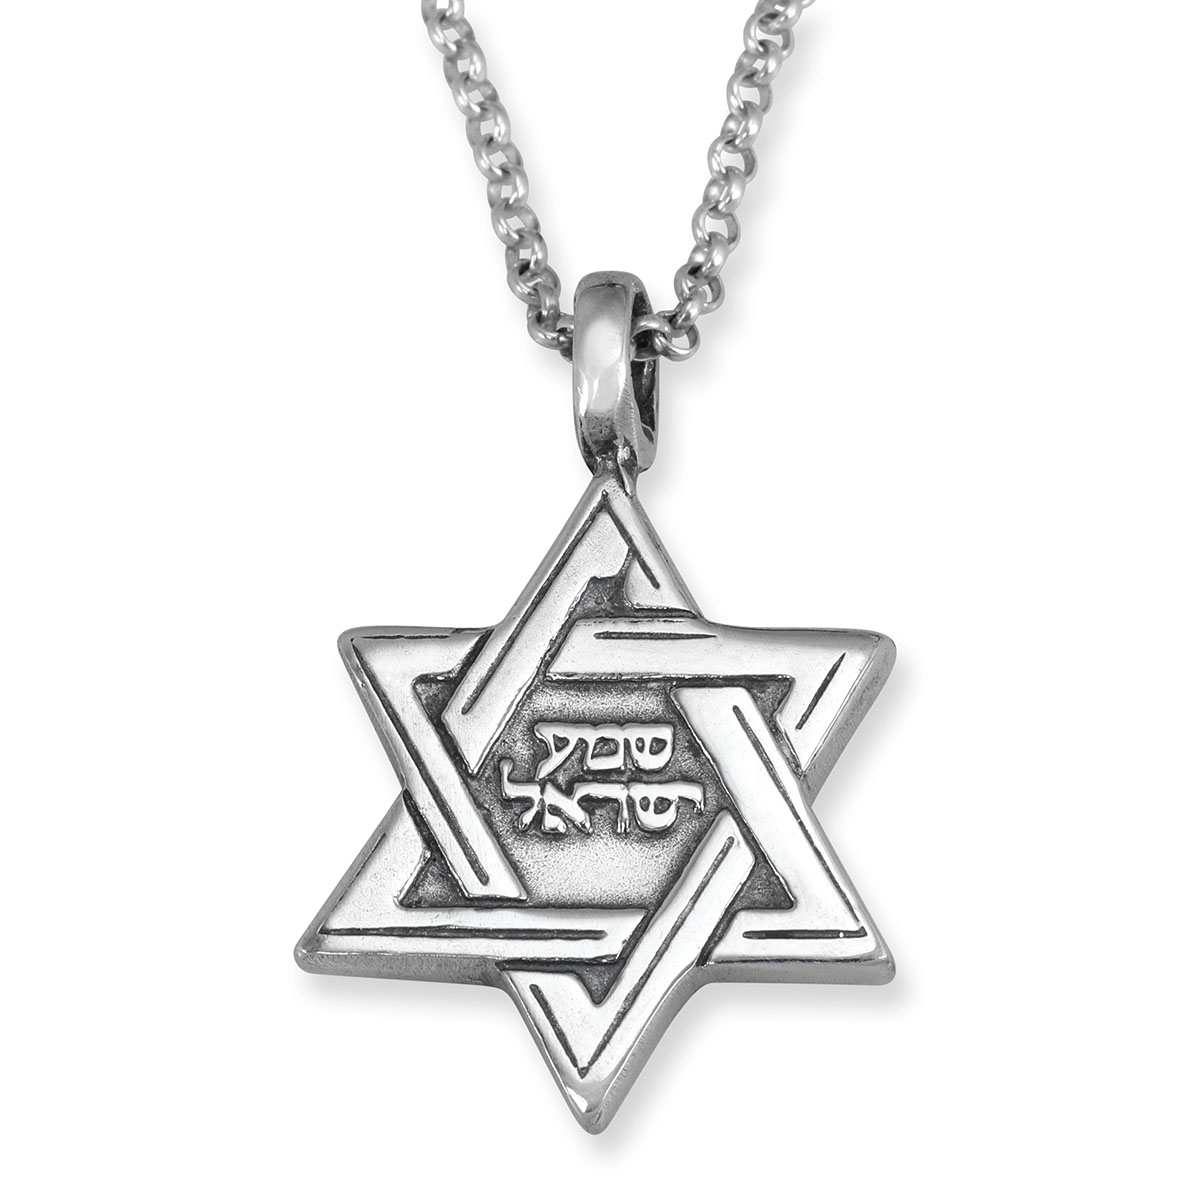 925 Sterling Silver Star of David Pendant Necklace with Microfilm Book of Psalms and Shema Yisrael (Deuteronomy 6:4) - 1